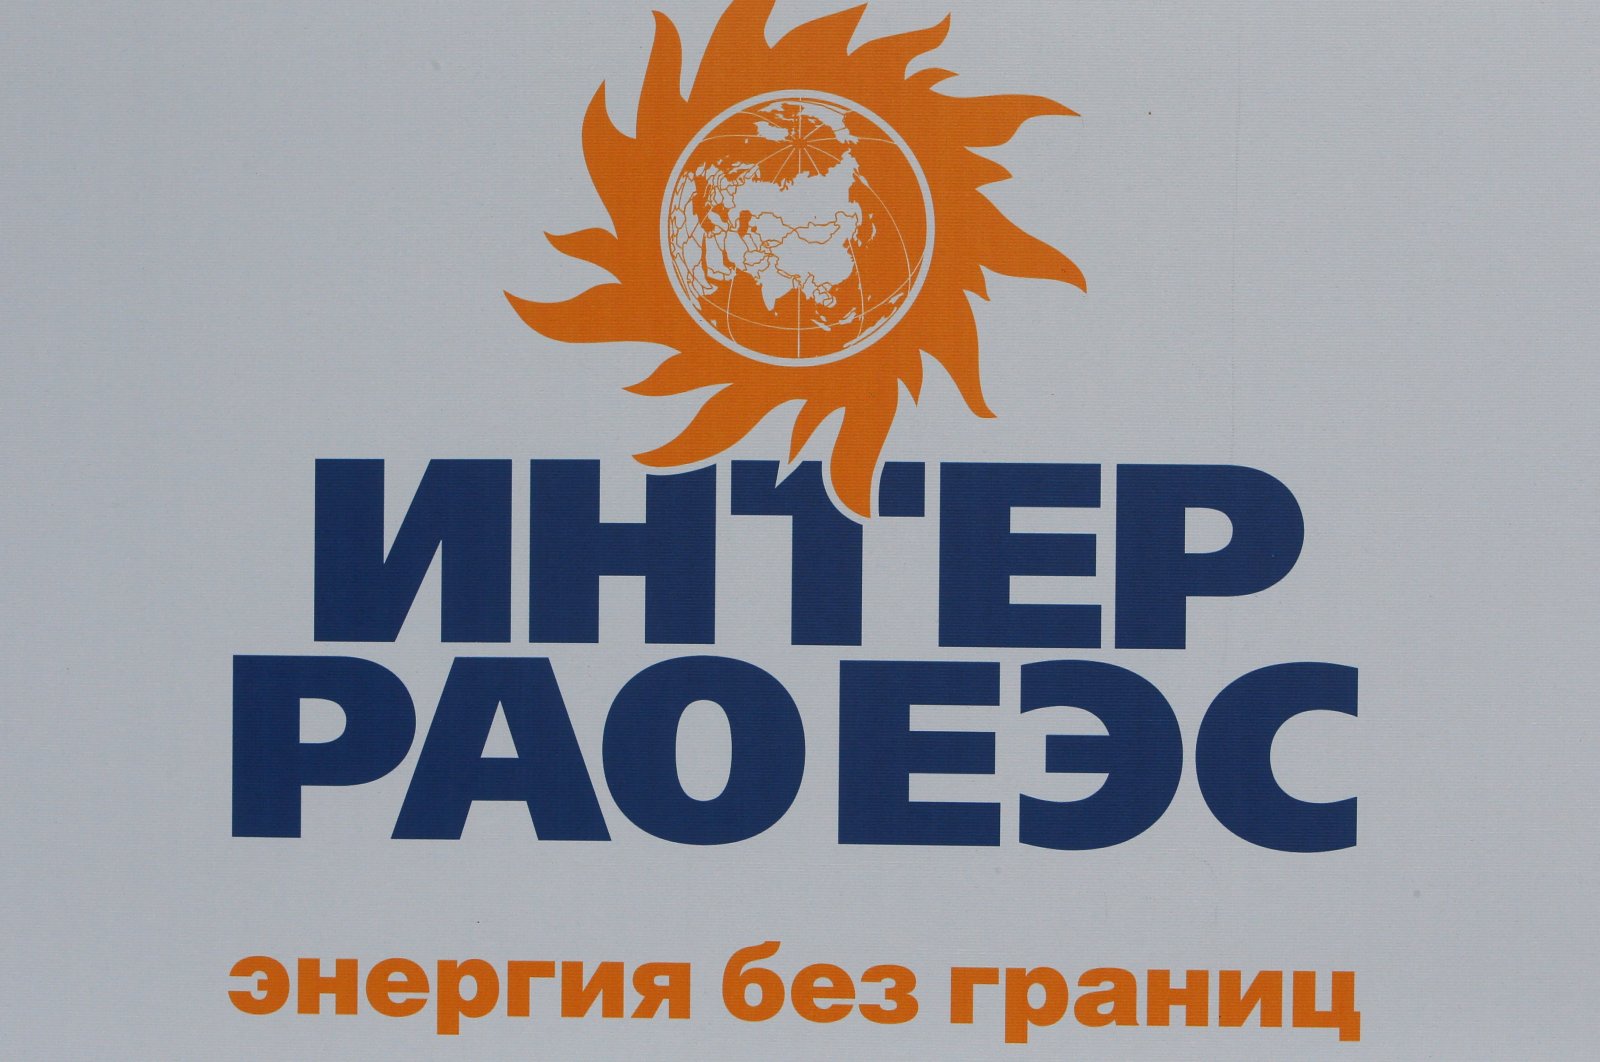 The logo of Russian energy company Inter RAO UES is seen on a board at the St. Petersburg International Economic Forum 2017 (SPIEF 2017), St. Petersburg, Russia, June 1, 2017. (Reuters Photo)